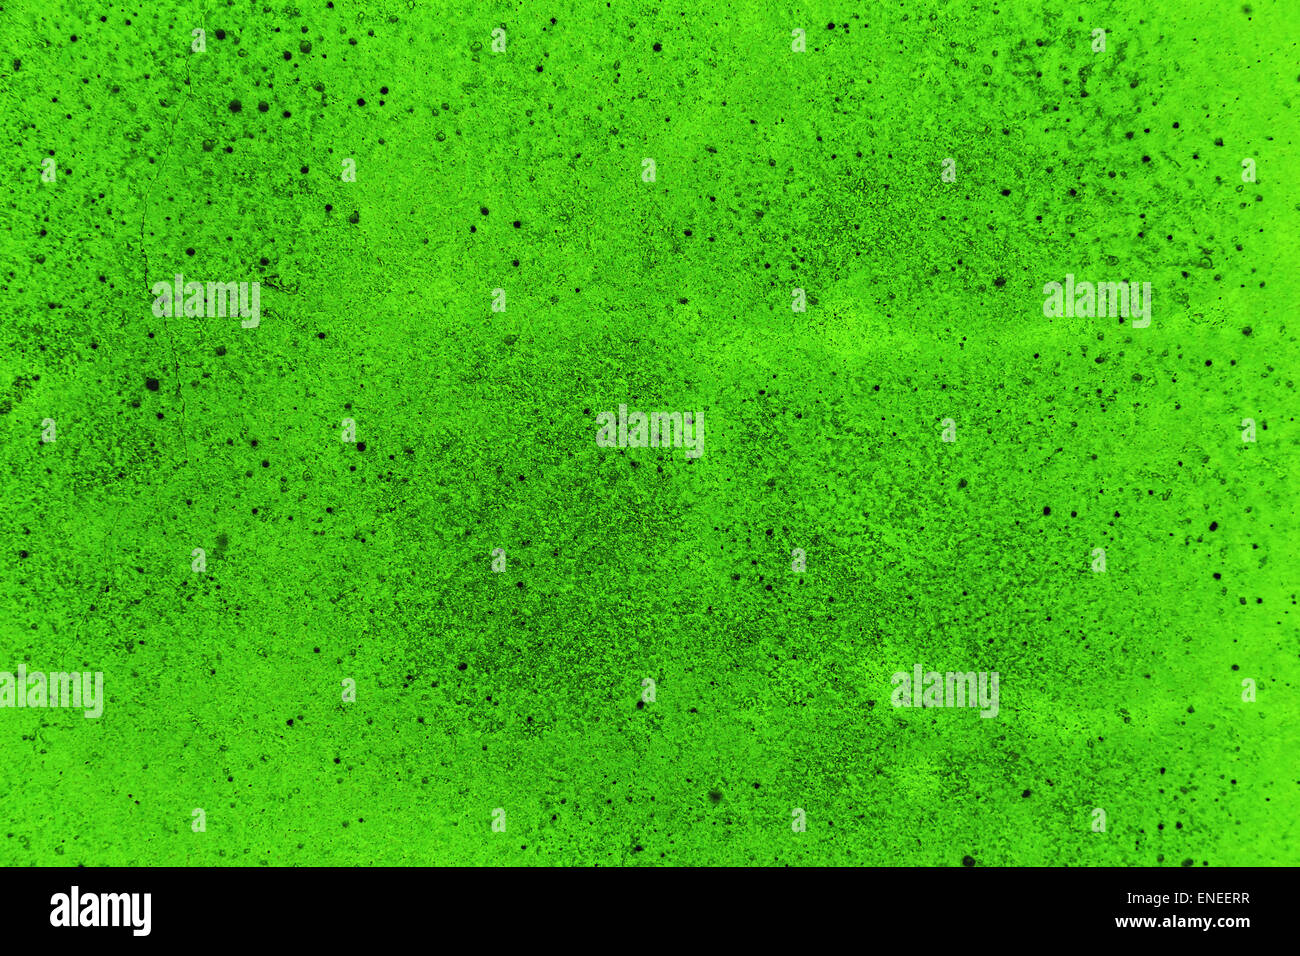 Grunge plaster cement or concrete wall texture green color Stock Photo